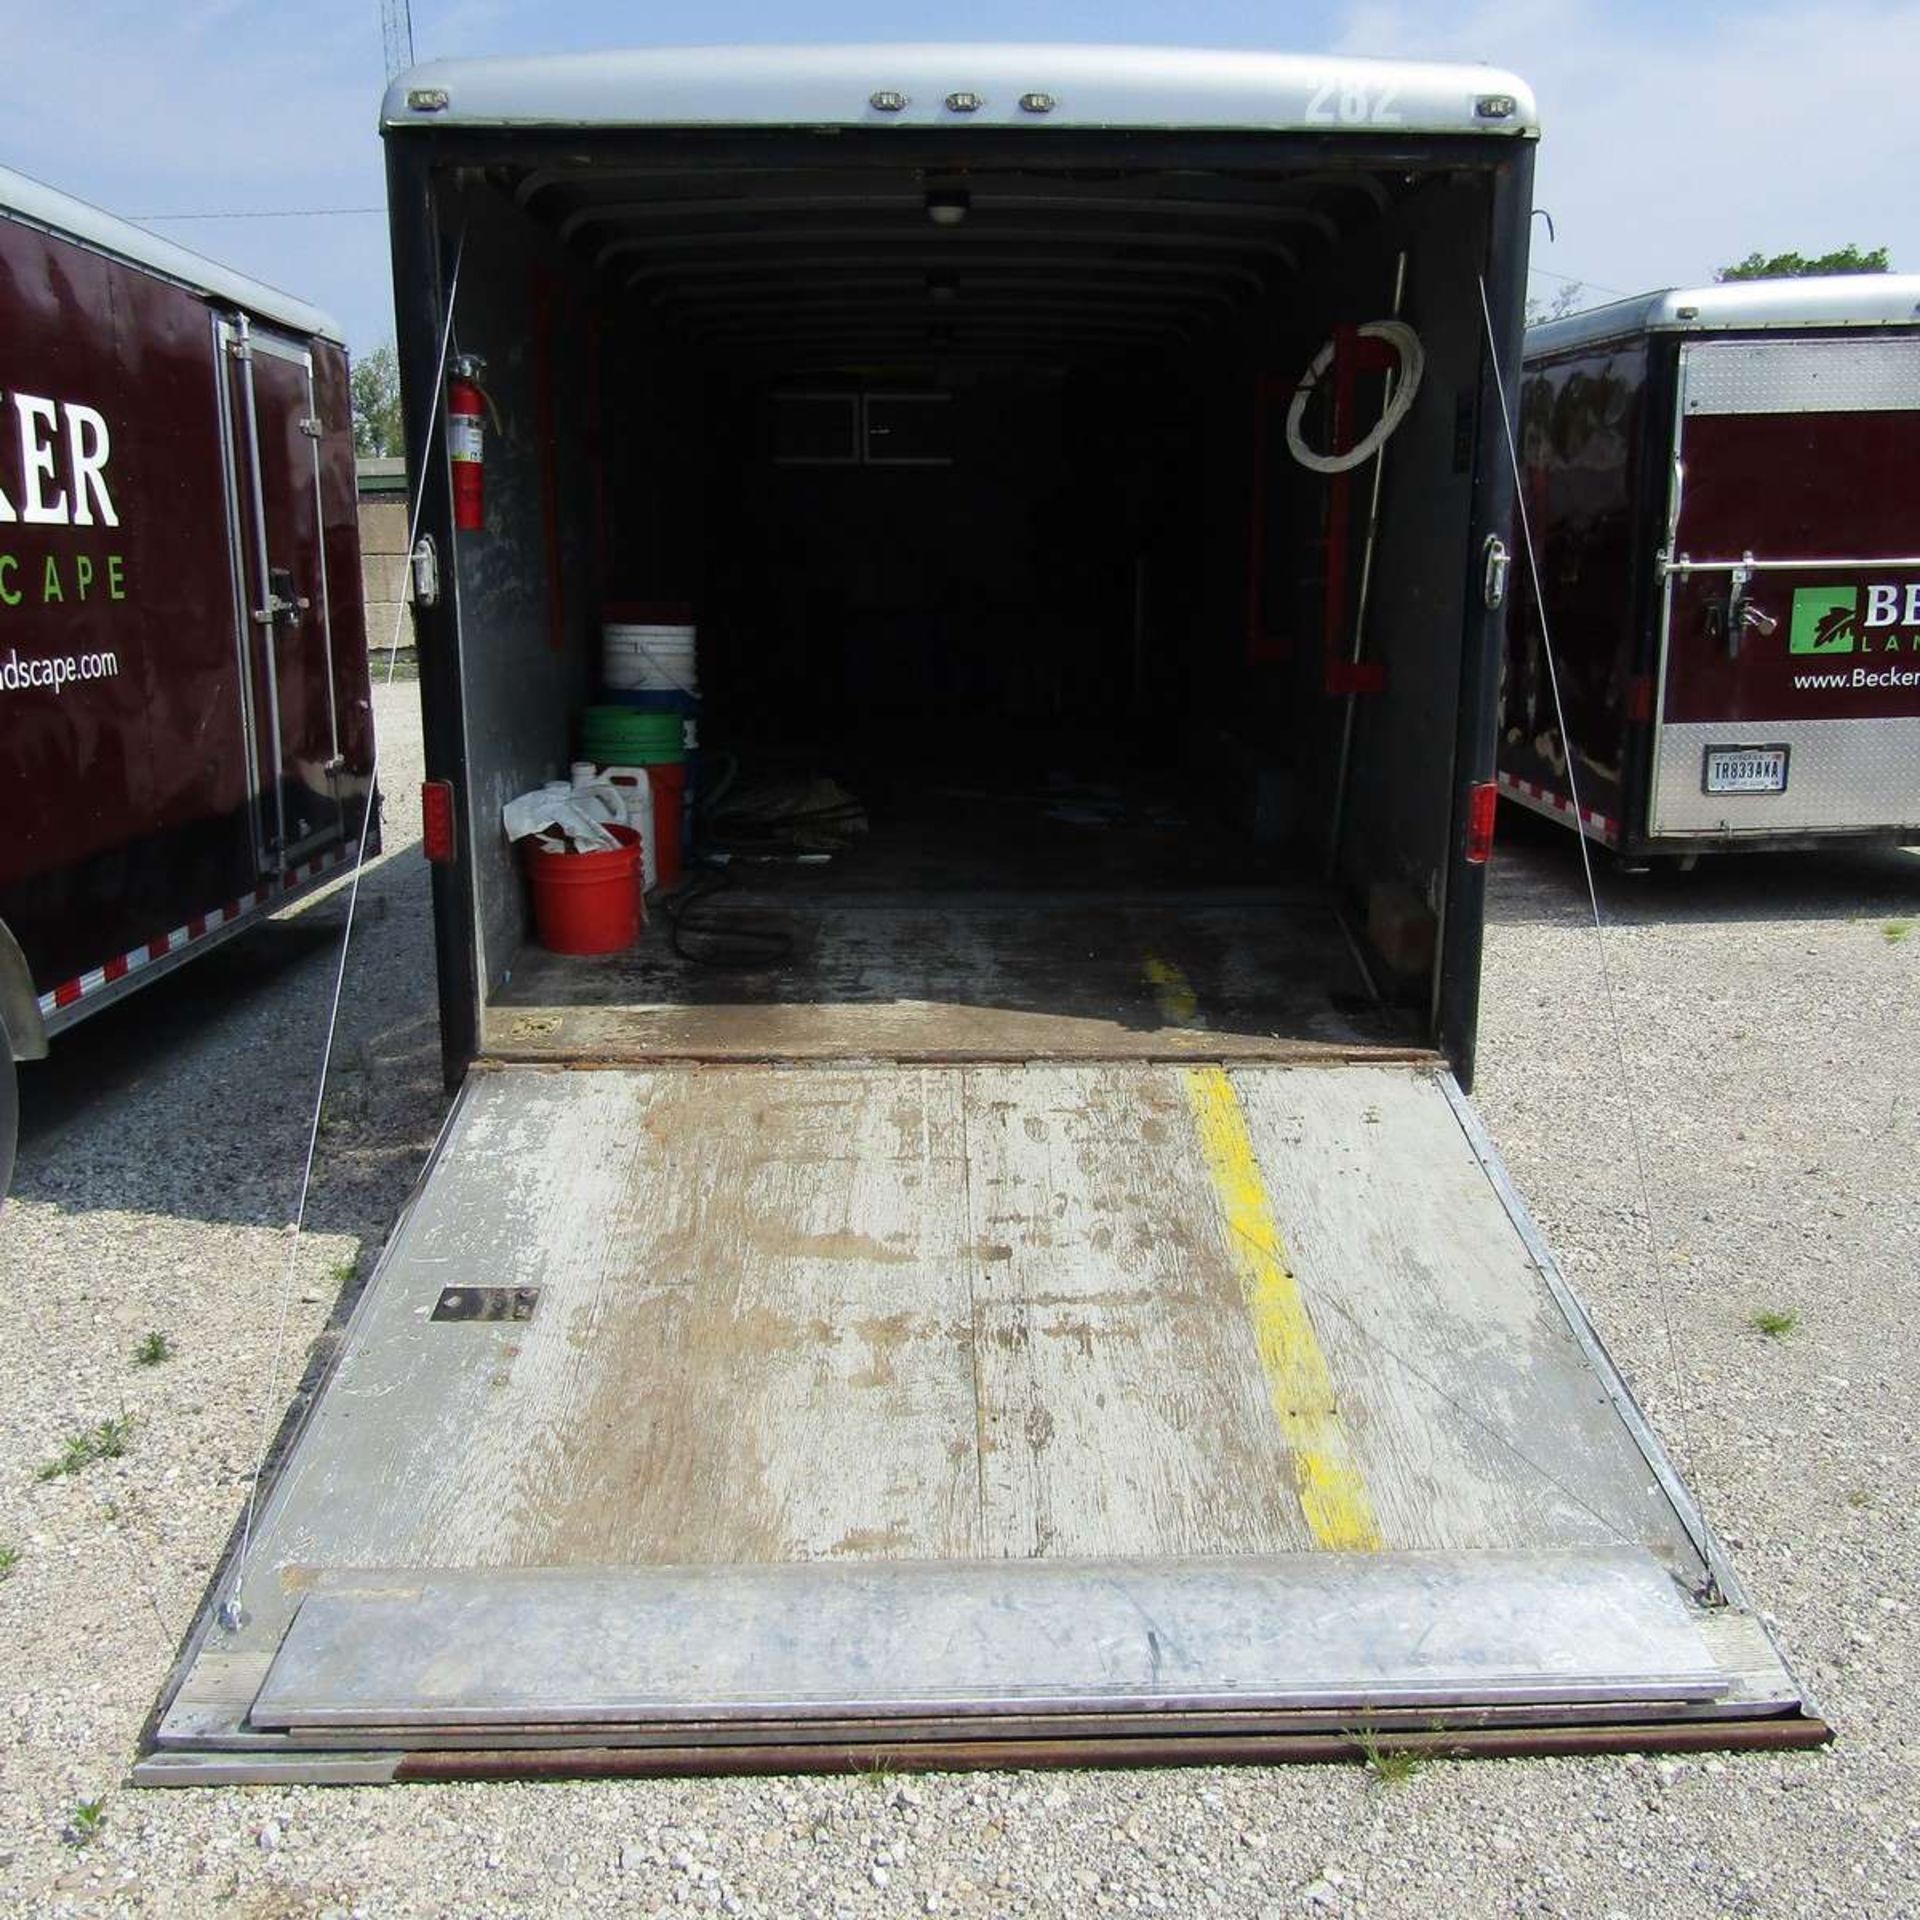 Wells Cargo AW2425 24' Enclosed Trailer - Image 3 of 4